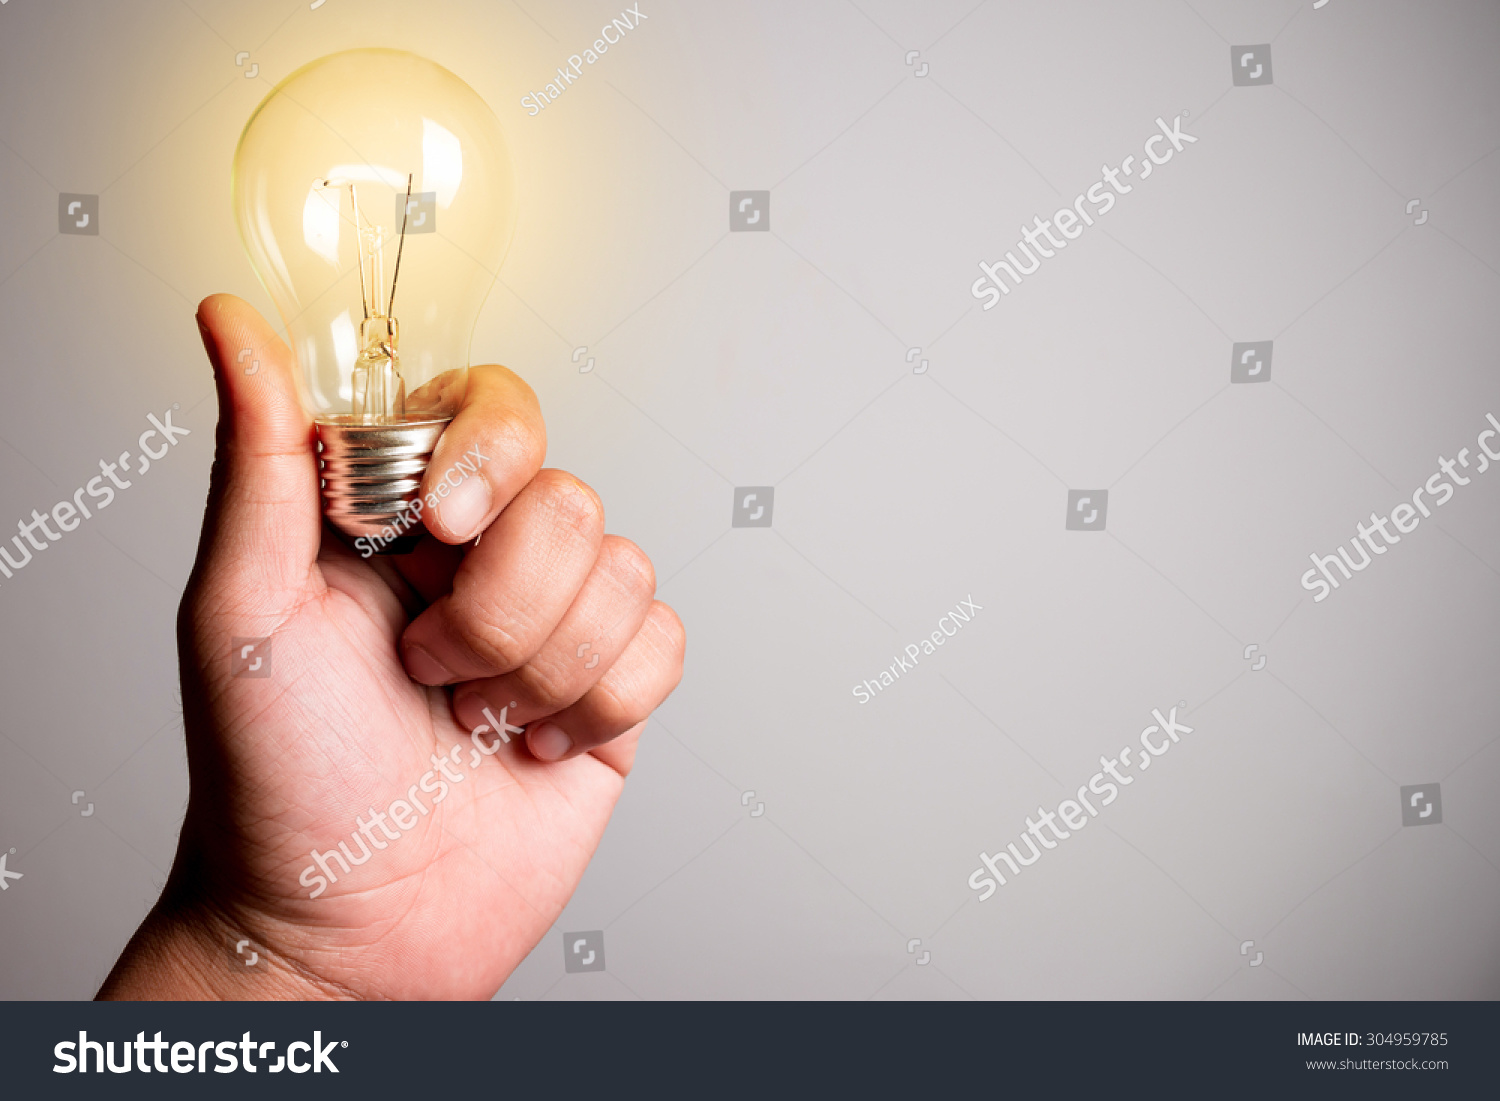 Hand holding a glowing light bulb #304959785